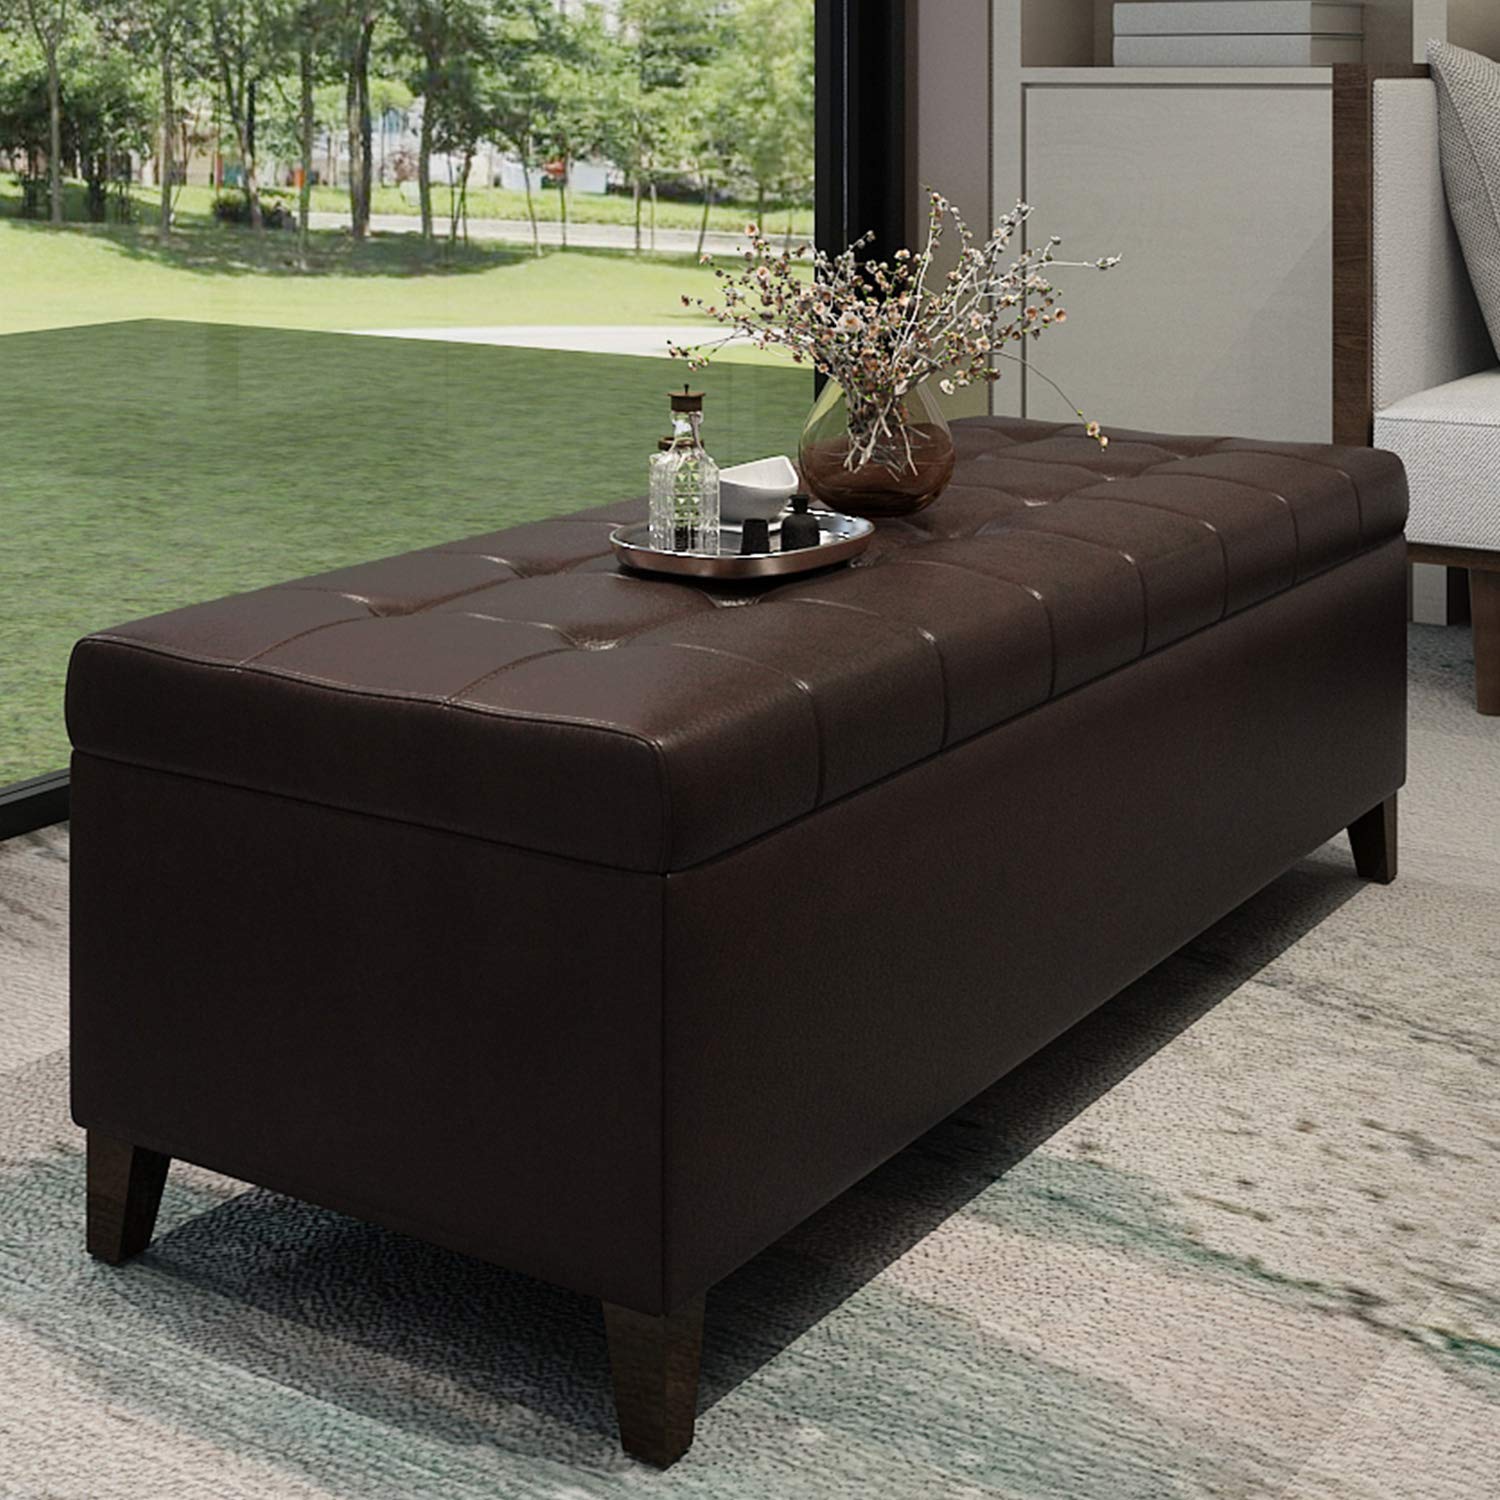 Asense 51" Long Storage Ottoman Bench Large Space, Faux Leather Rectangular Lift Top Footrest Extra Seat Footstool for Living Room Bedroom Entryway, Brown